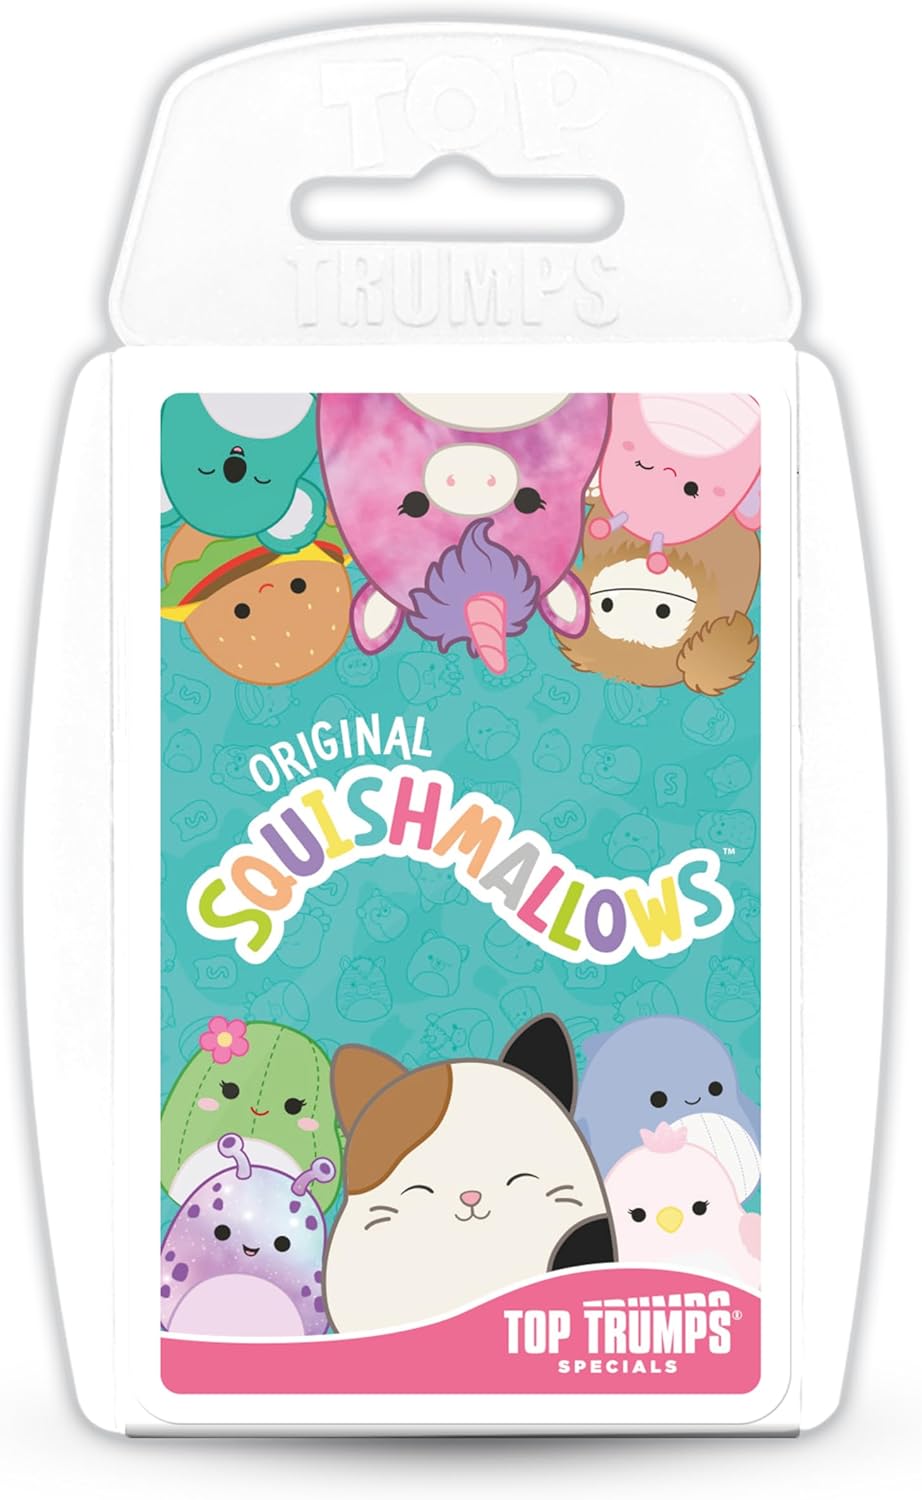 Top Trumps Squishmallows Card Game Is Now Available At Phillips Toys